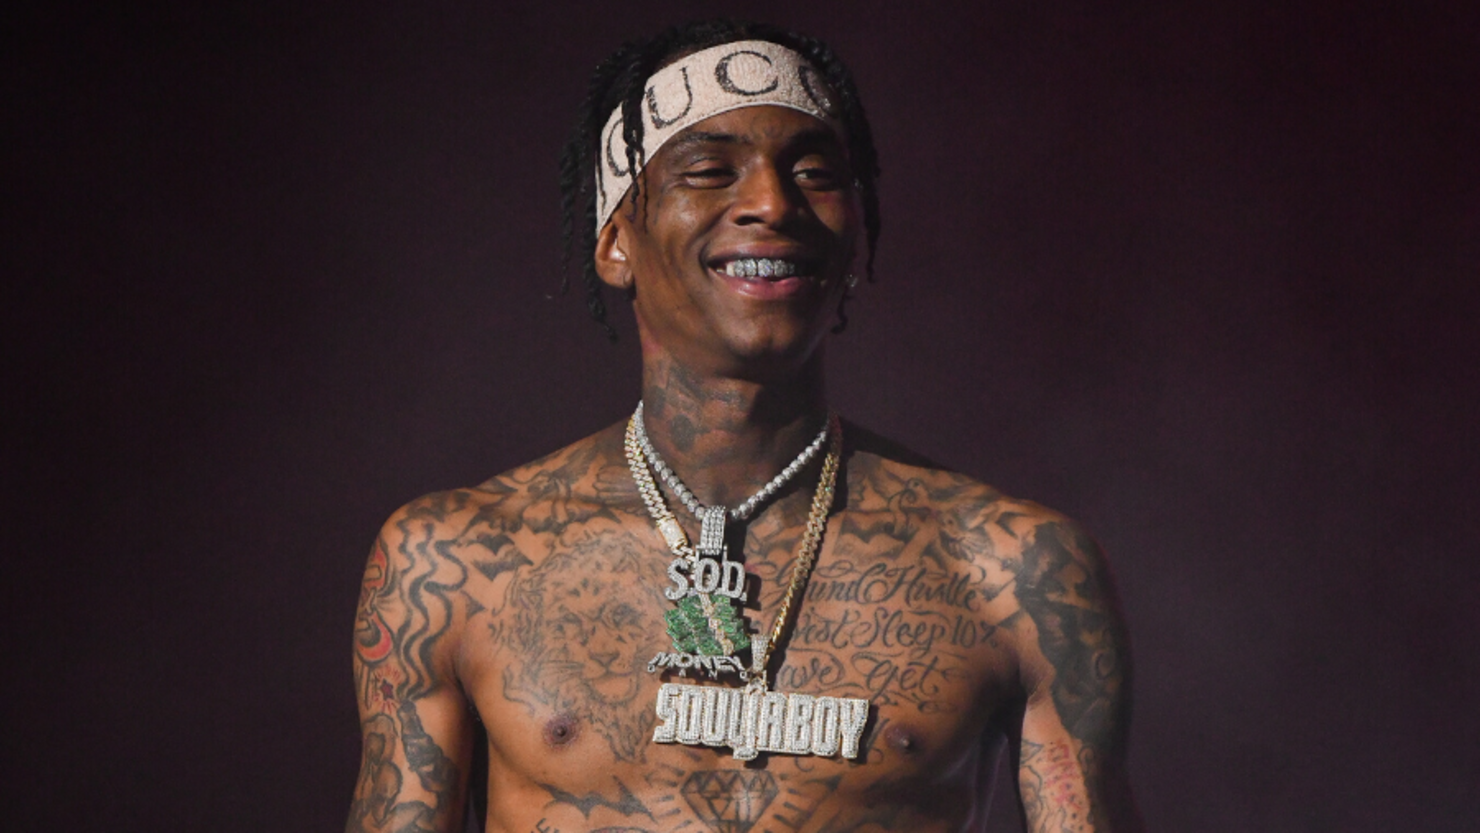 Soulja Boy Announces His First Child Is On The Way